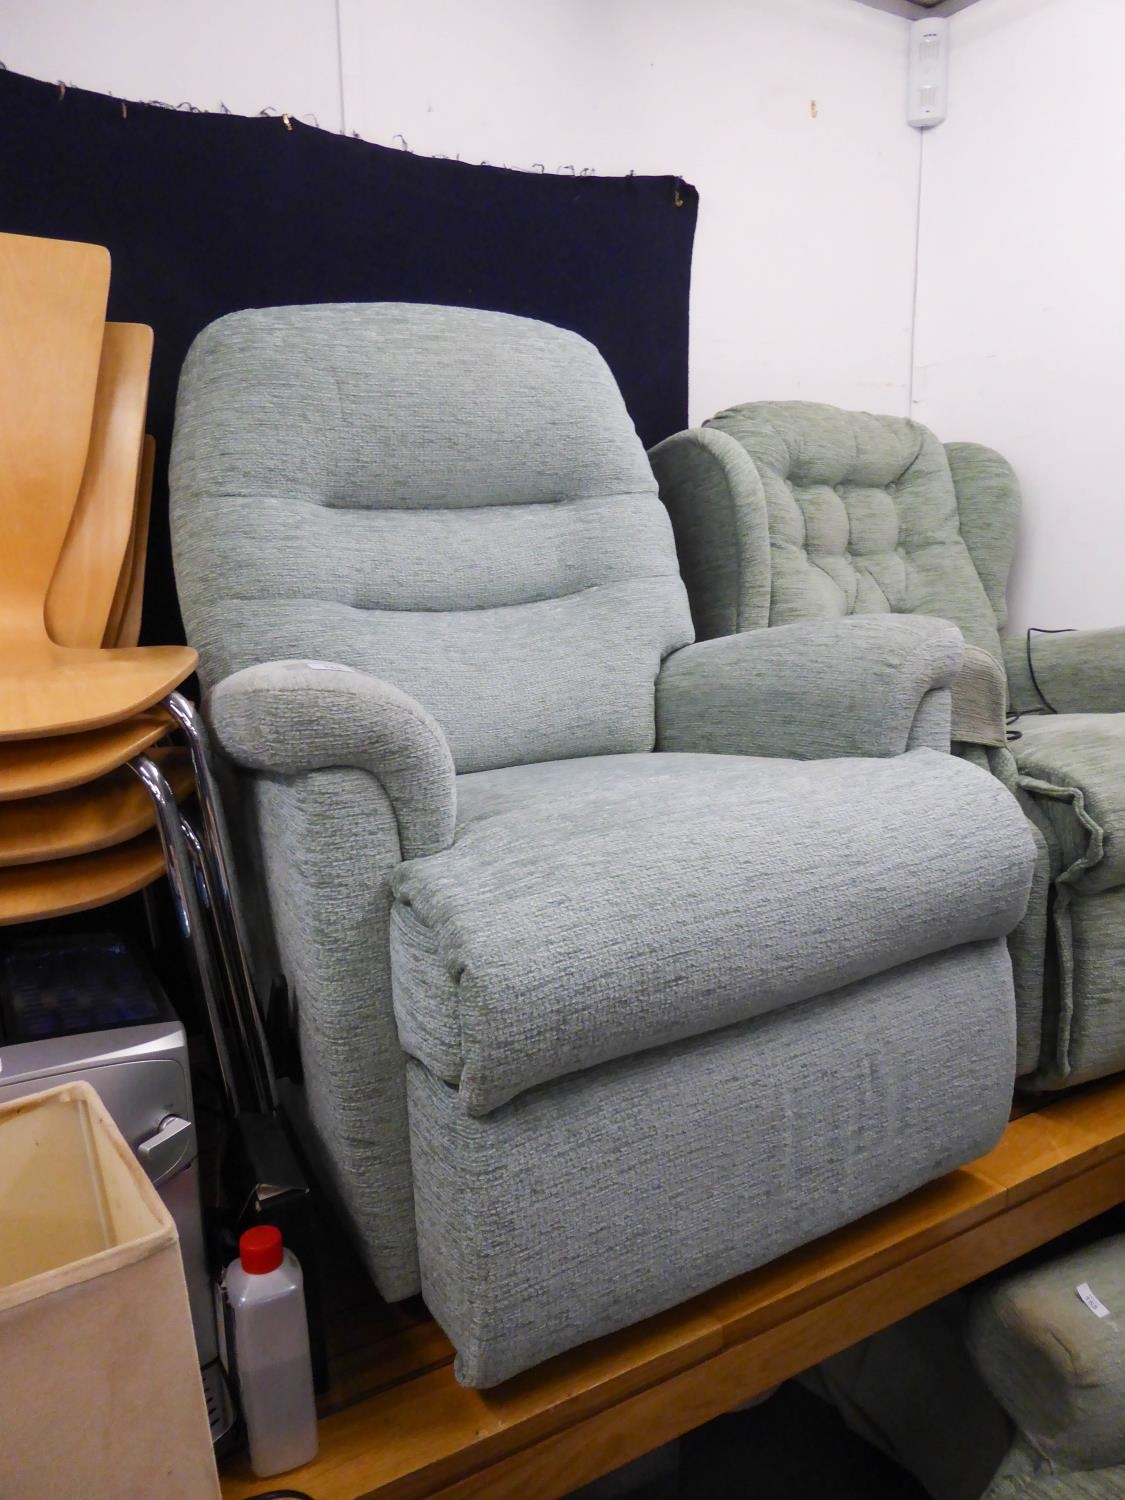 A MANUALLY RECLINING LOUNGE ARMCHAIR, COVERED IN GREY WOVEN FABRIC